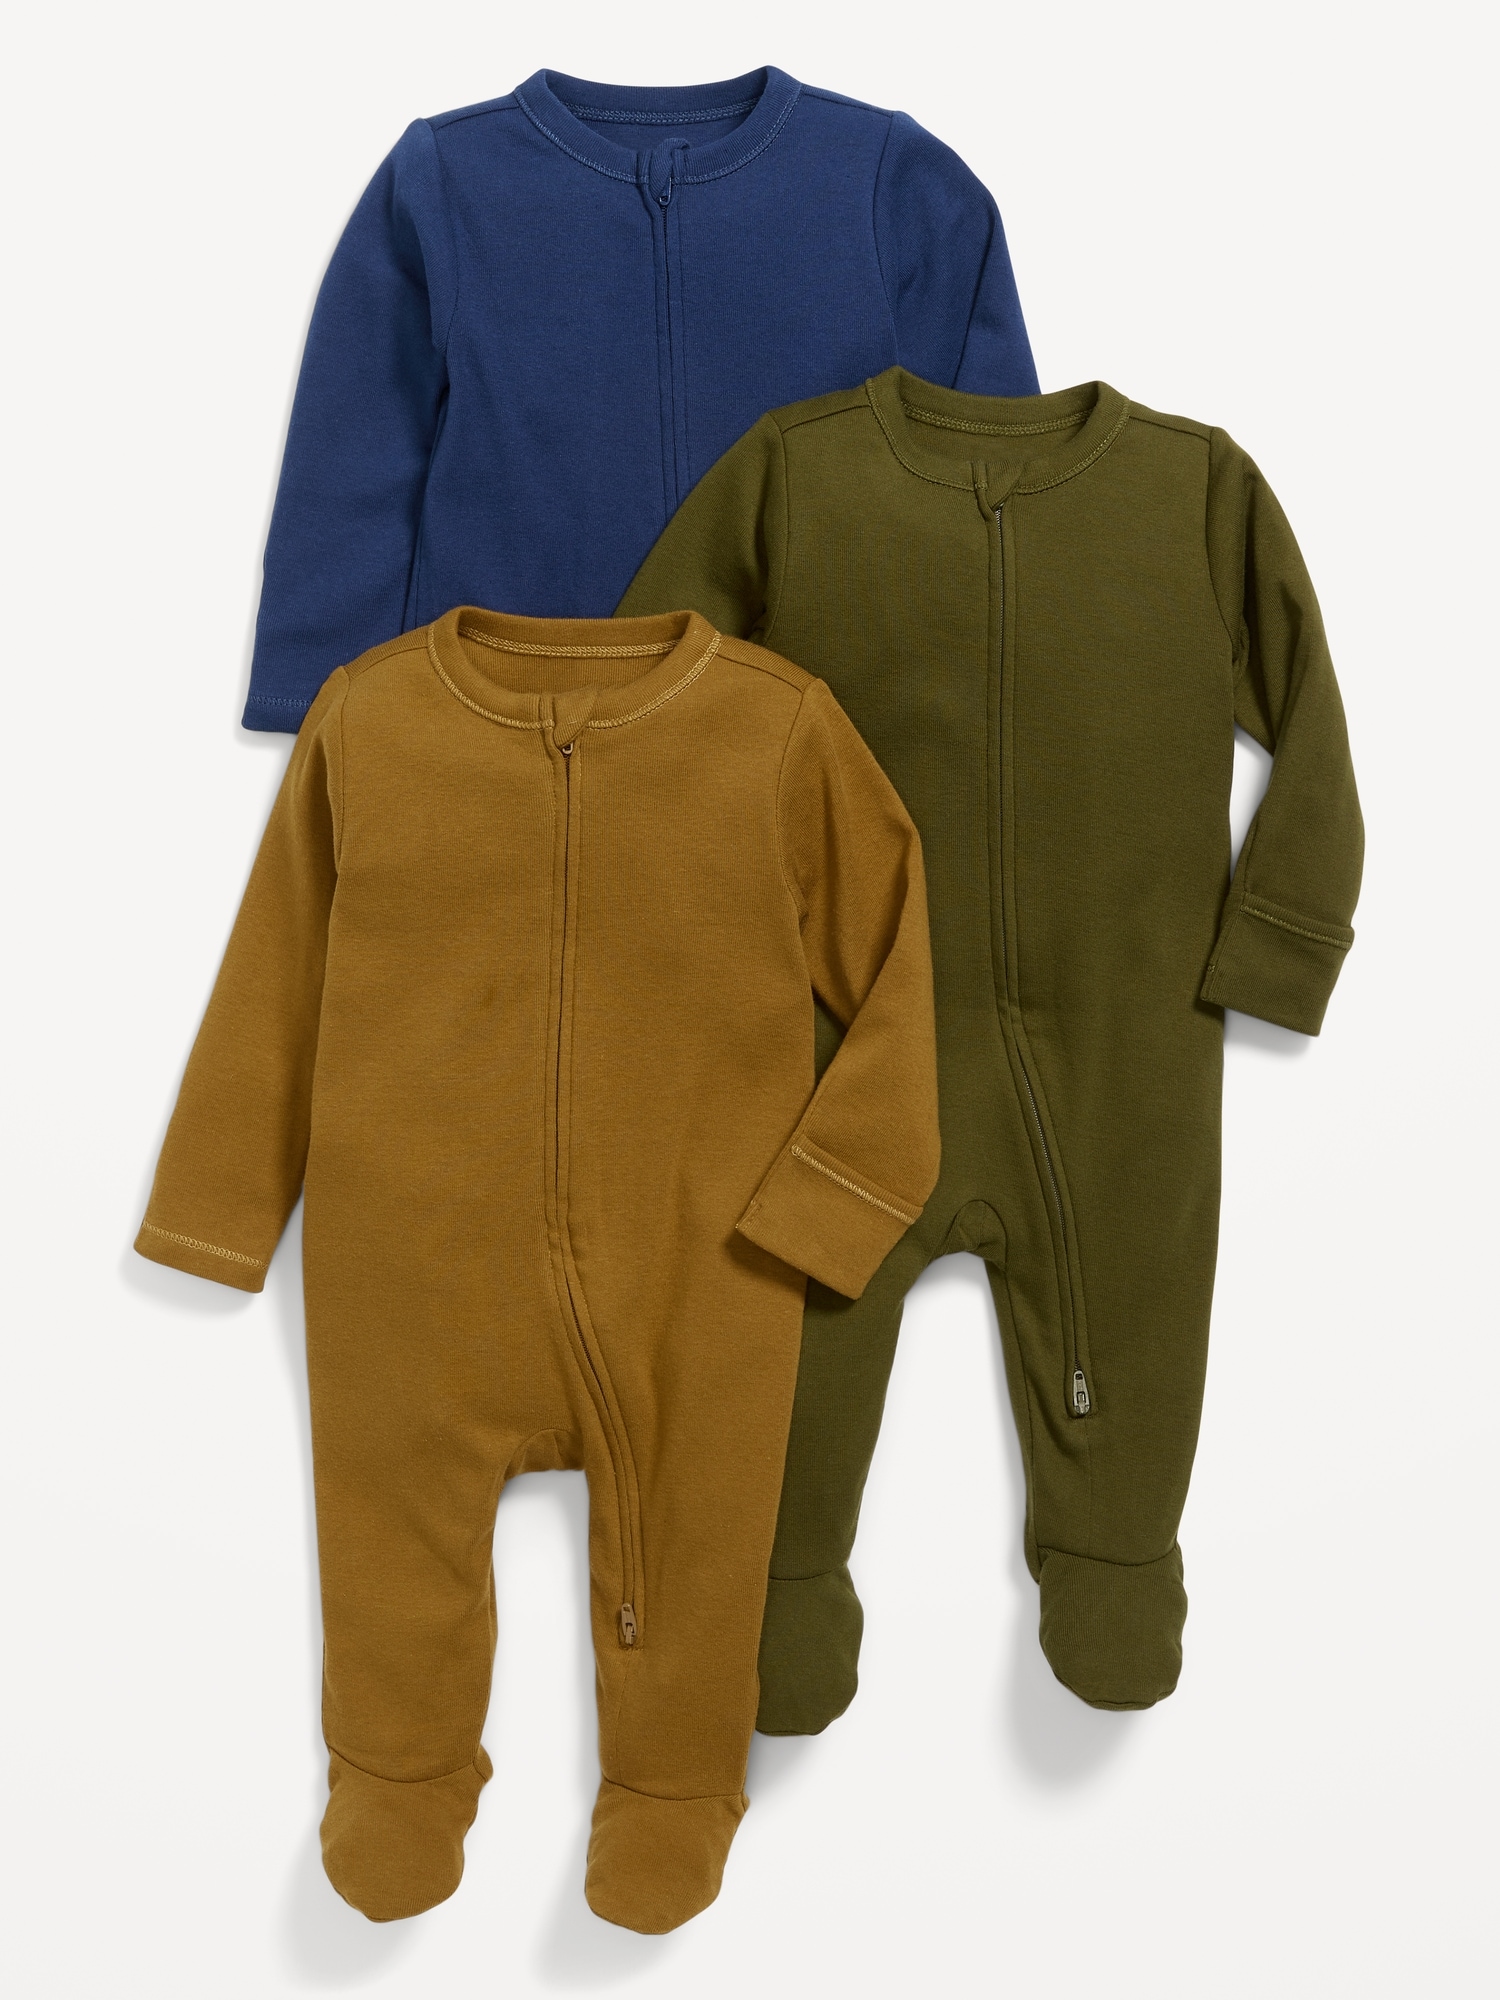 Oldnavy 3-Pack Unisex 2-Way-Zip Sleep & Play Footed One-Piece for Baby Hot Deal